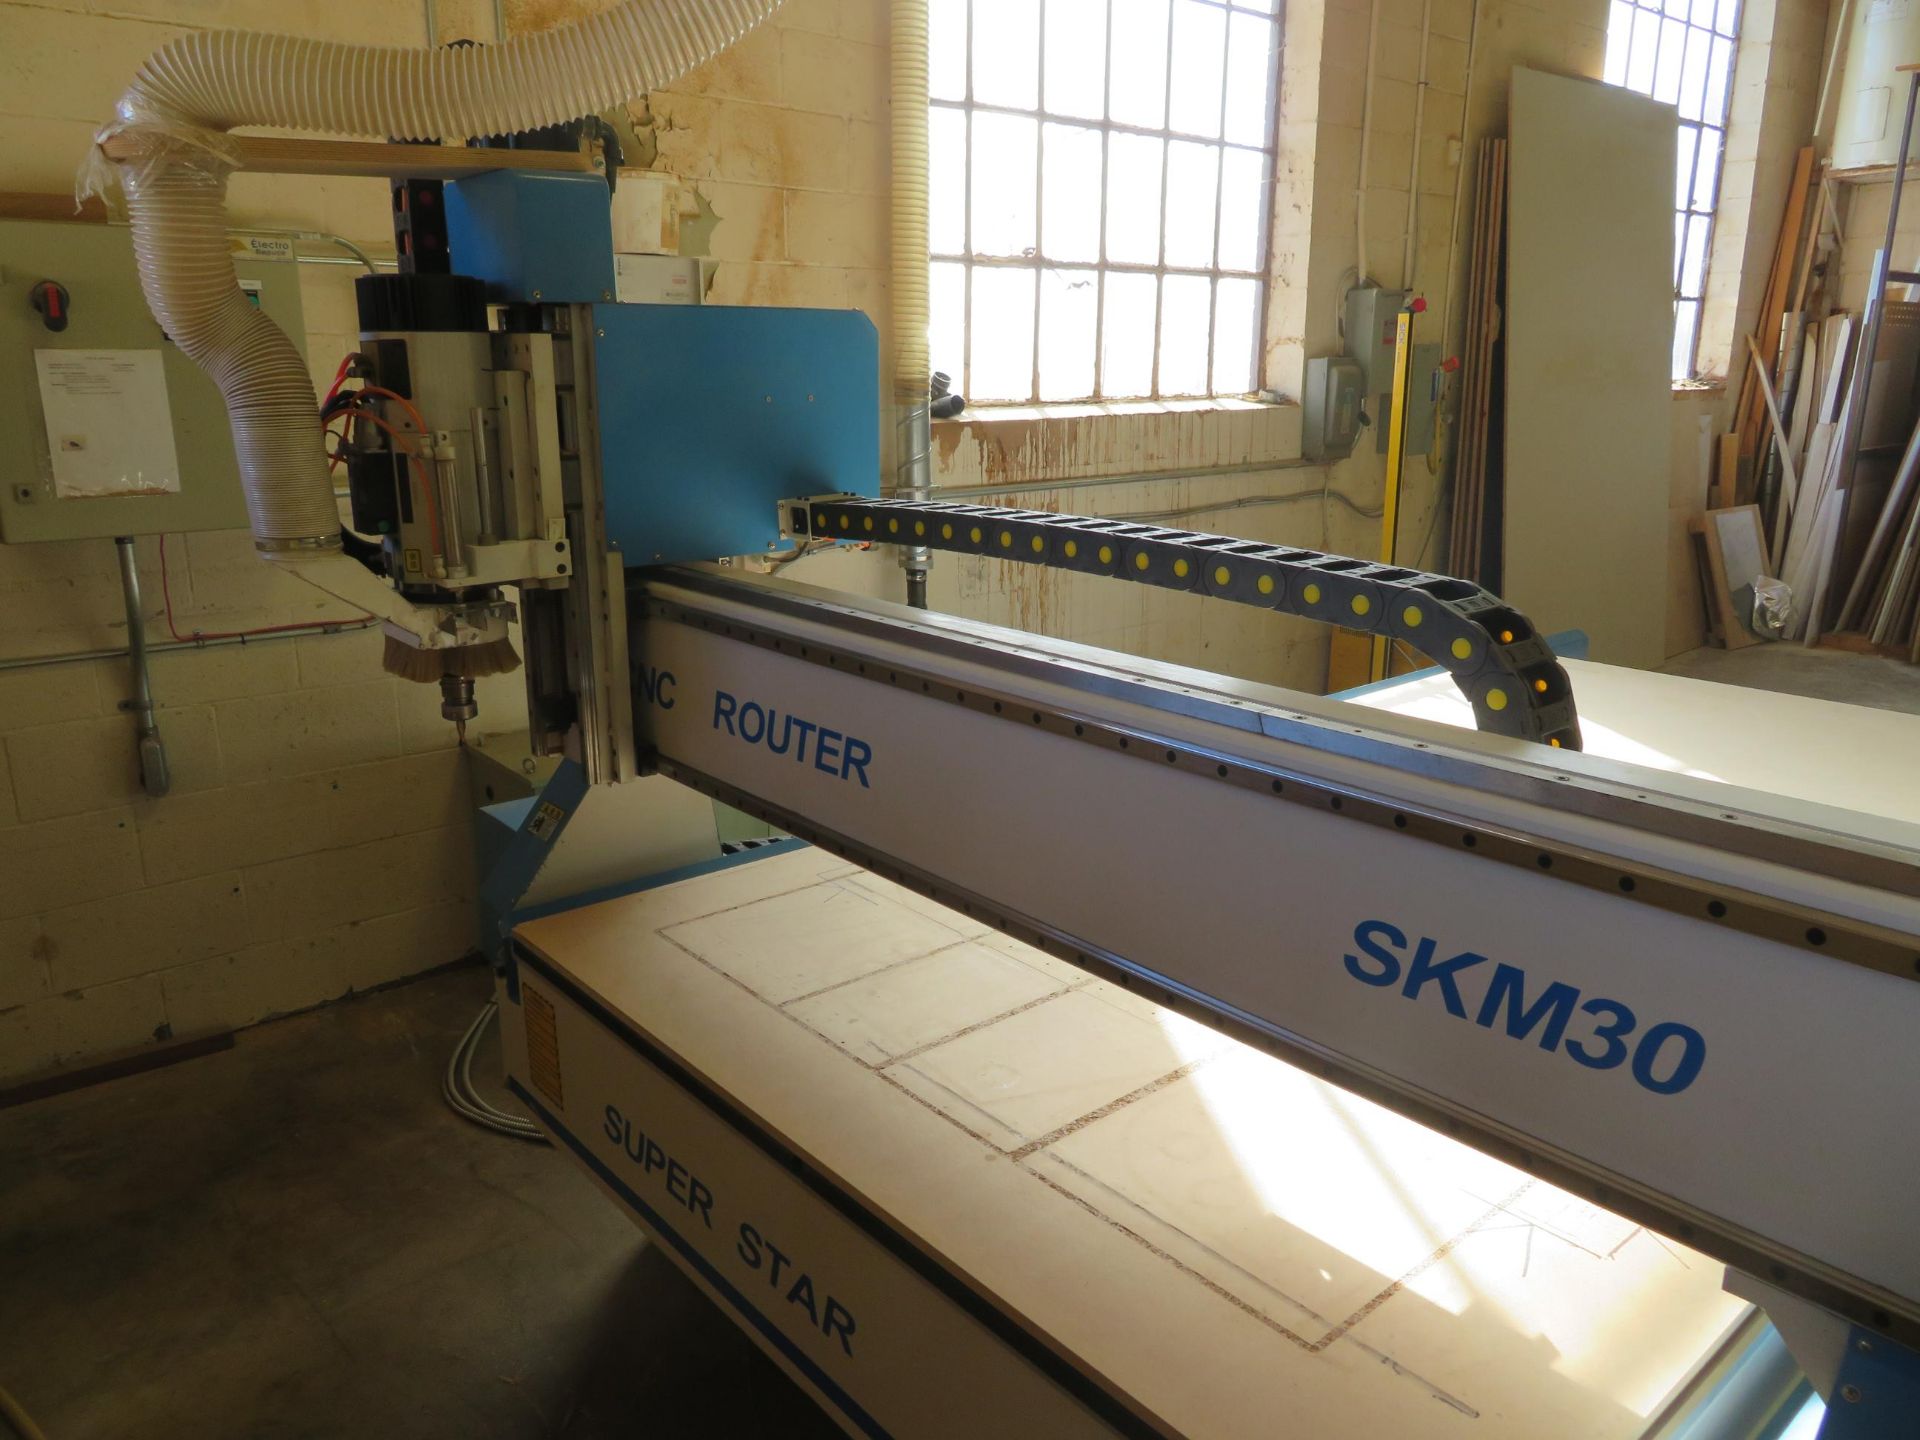 SUPER STAR CNC Router (2016) Mod #SKM30 with 10 tool changer, working area: 1500 mm x 3000 mm, - Image 4 of 19